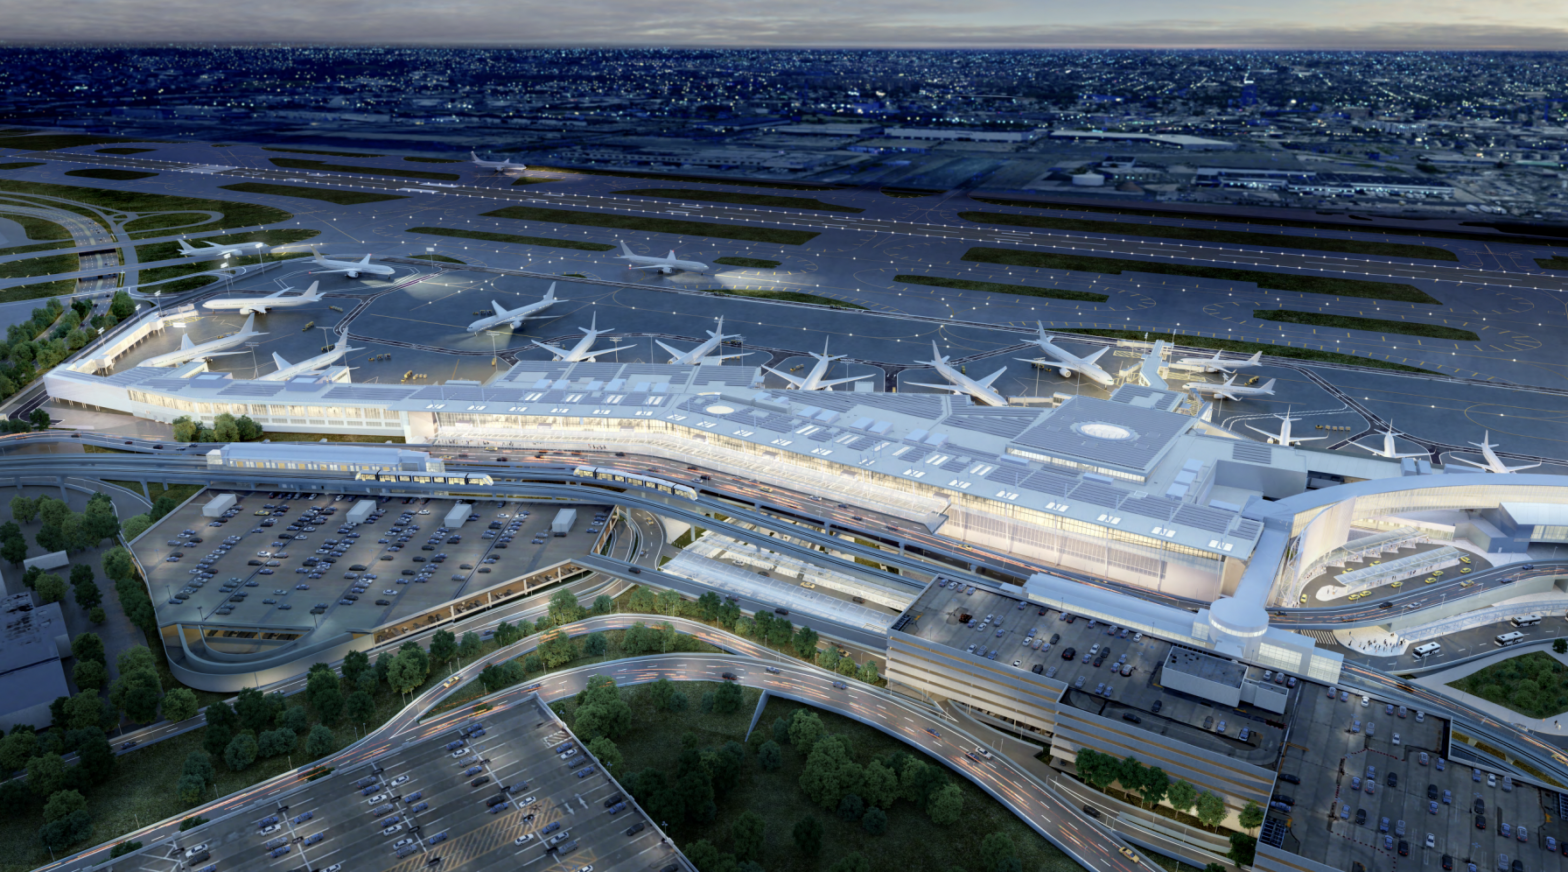 What To Expect From JetBlue's New $4.2 Billion Terminal At JFK